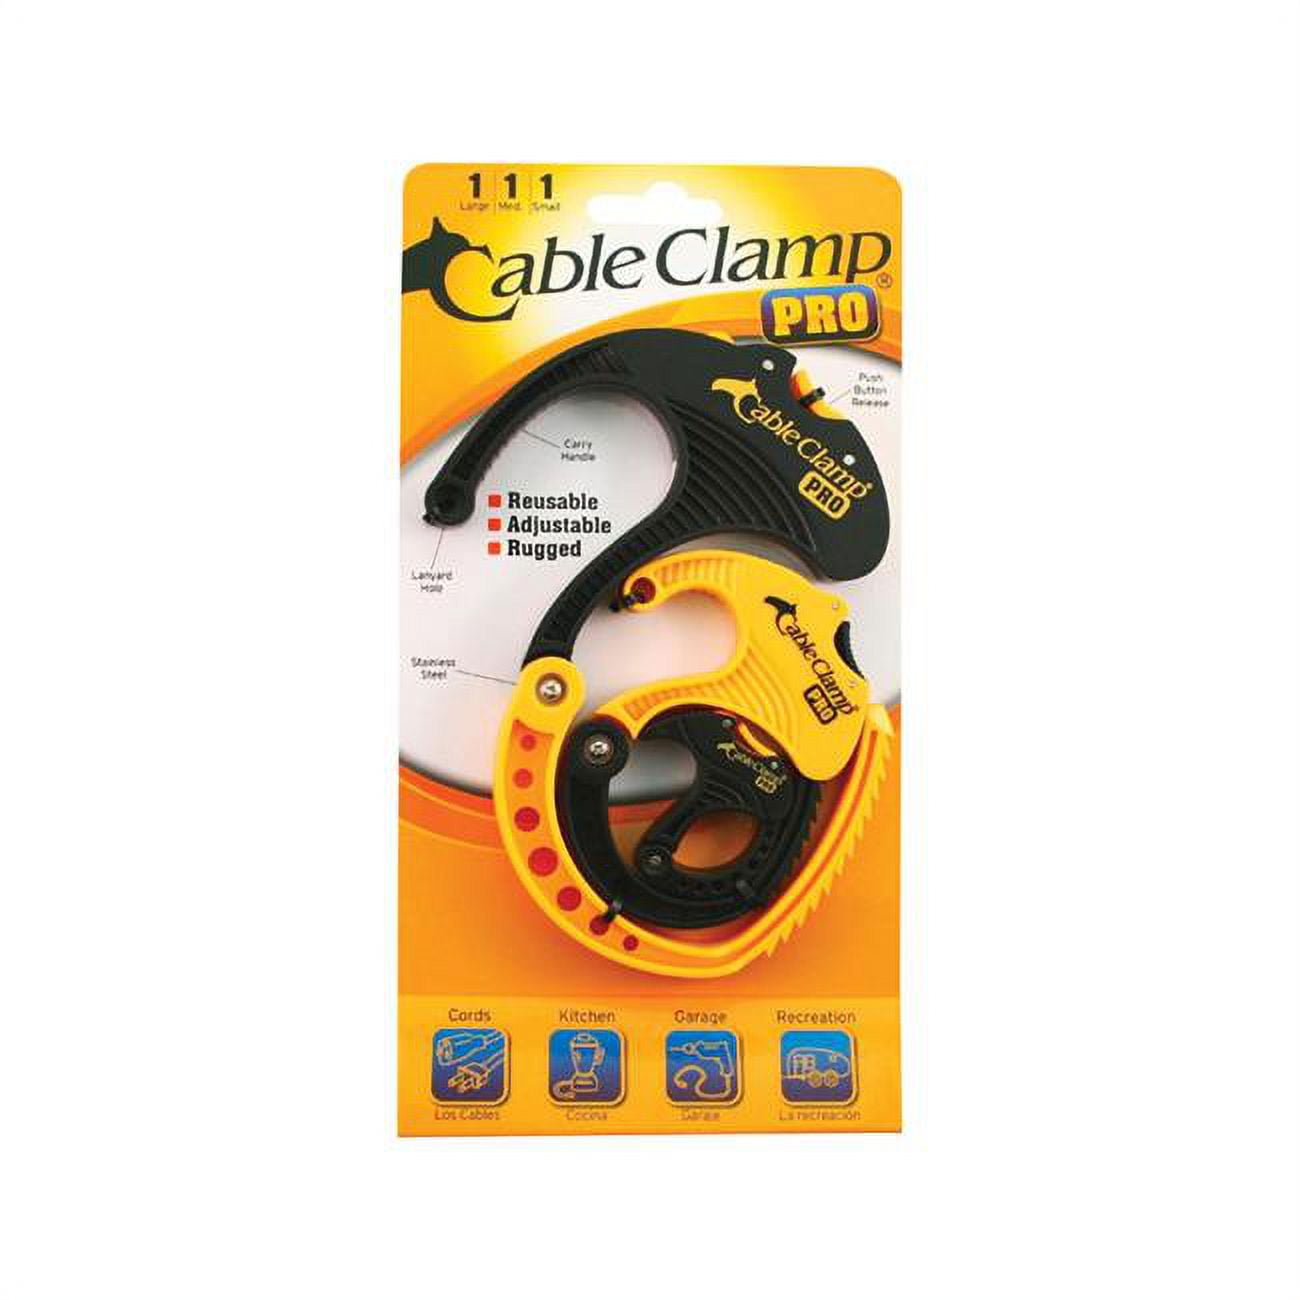 Cable Clamp 3788189 Multicolored Plastic Cable Organizer, Pack Of 12